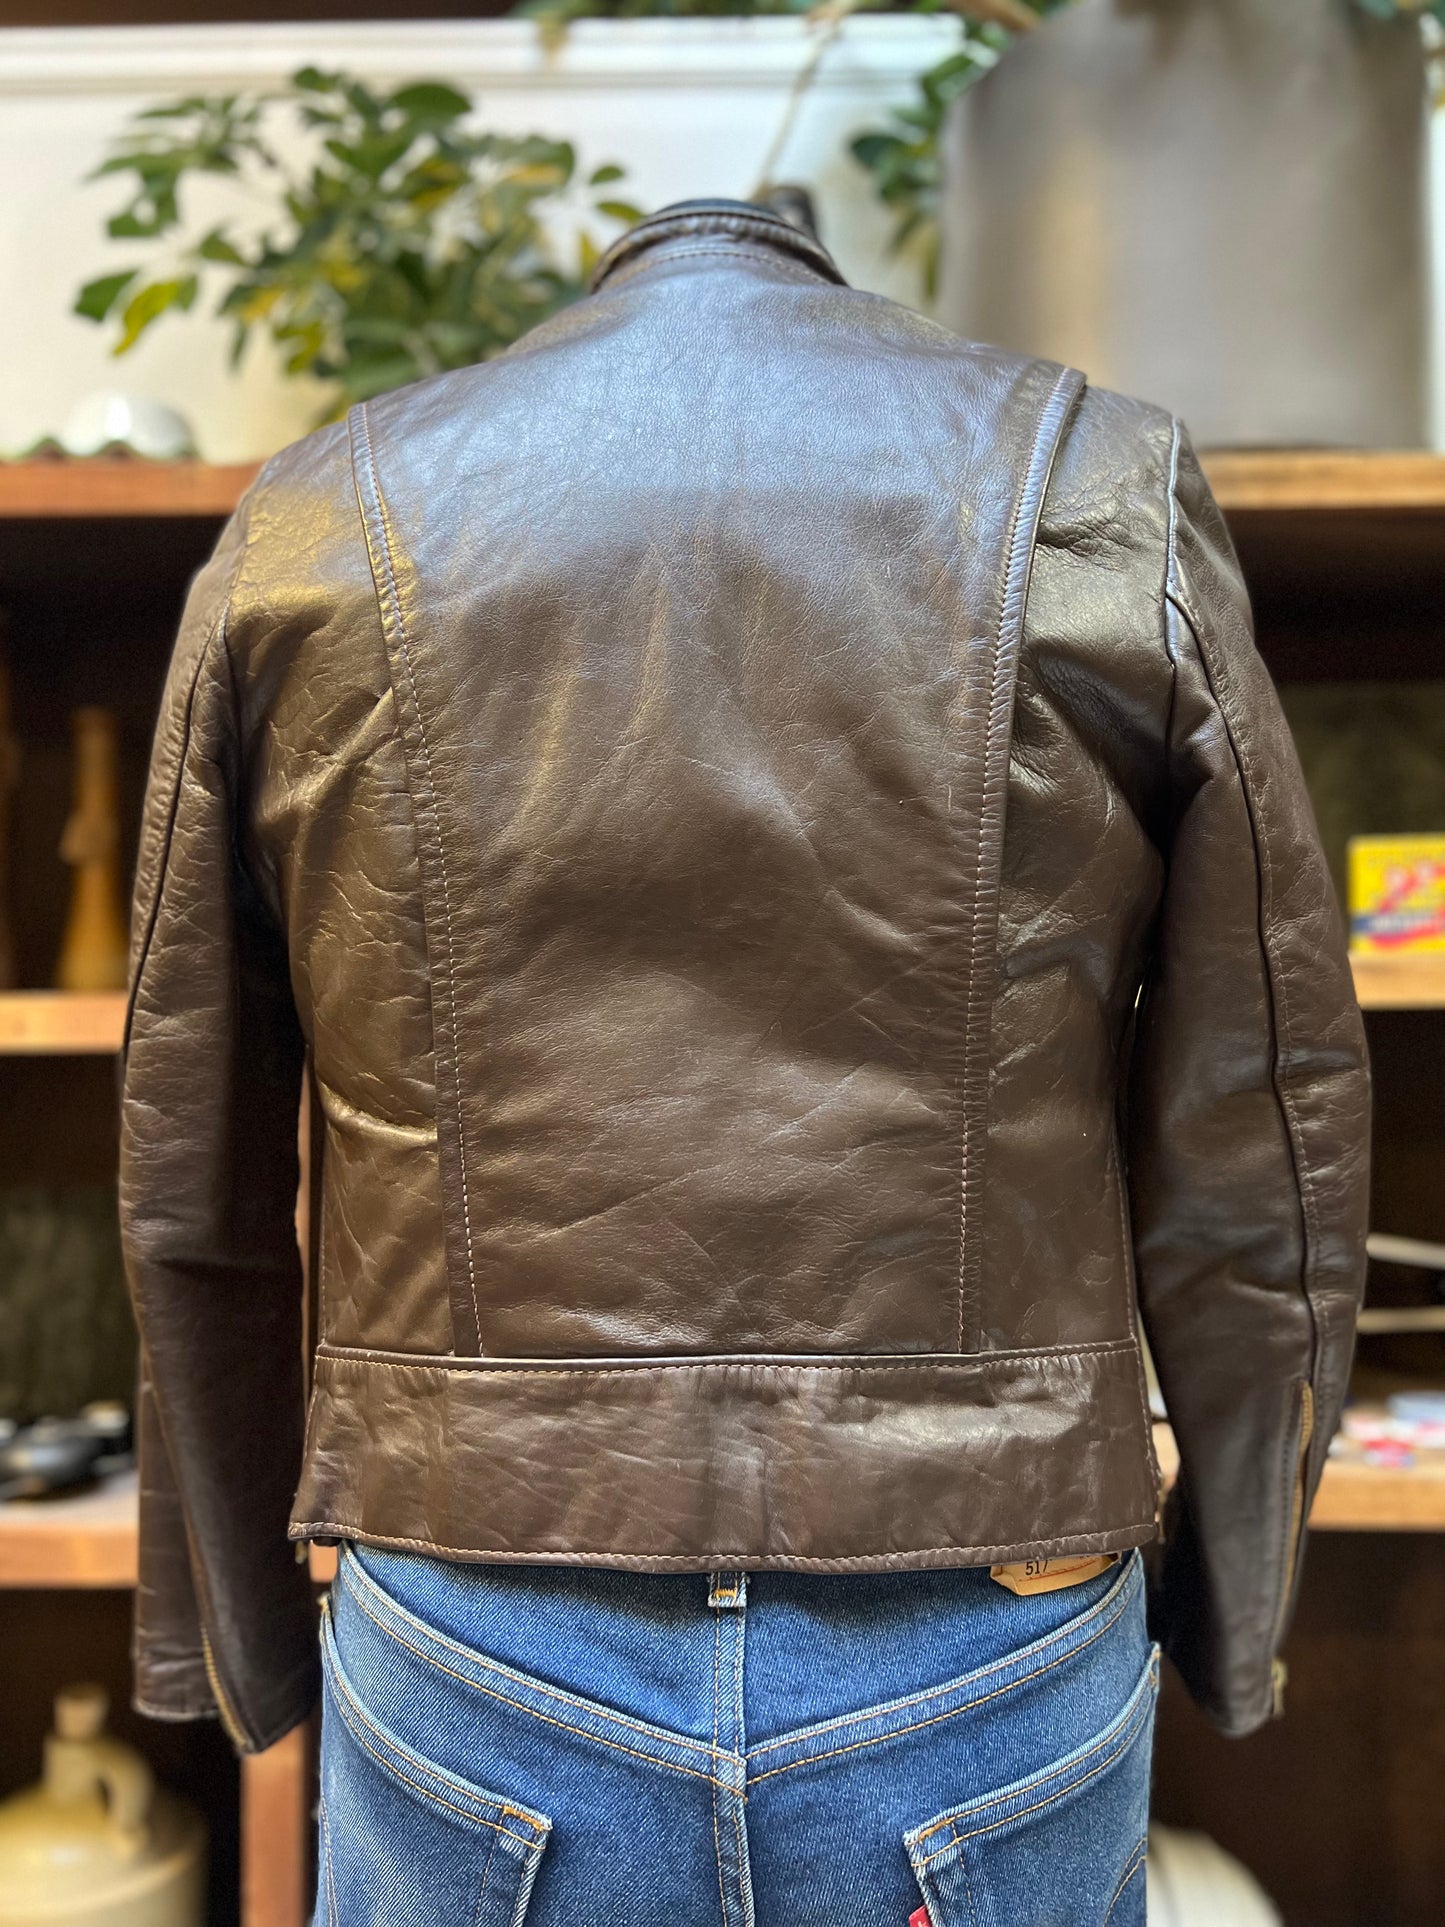 Brooks Leather Cafe Racer Motorcycle Jacket (Brown) Size 38